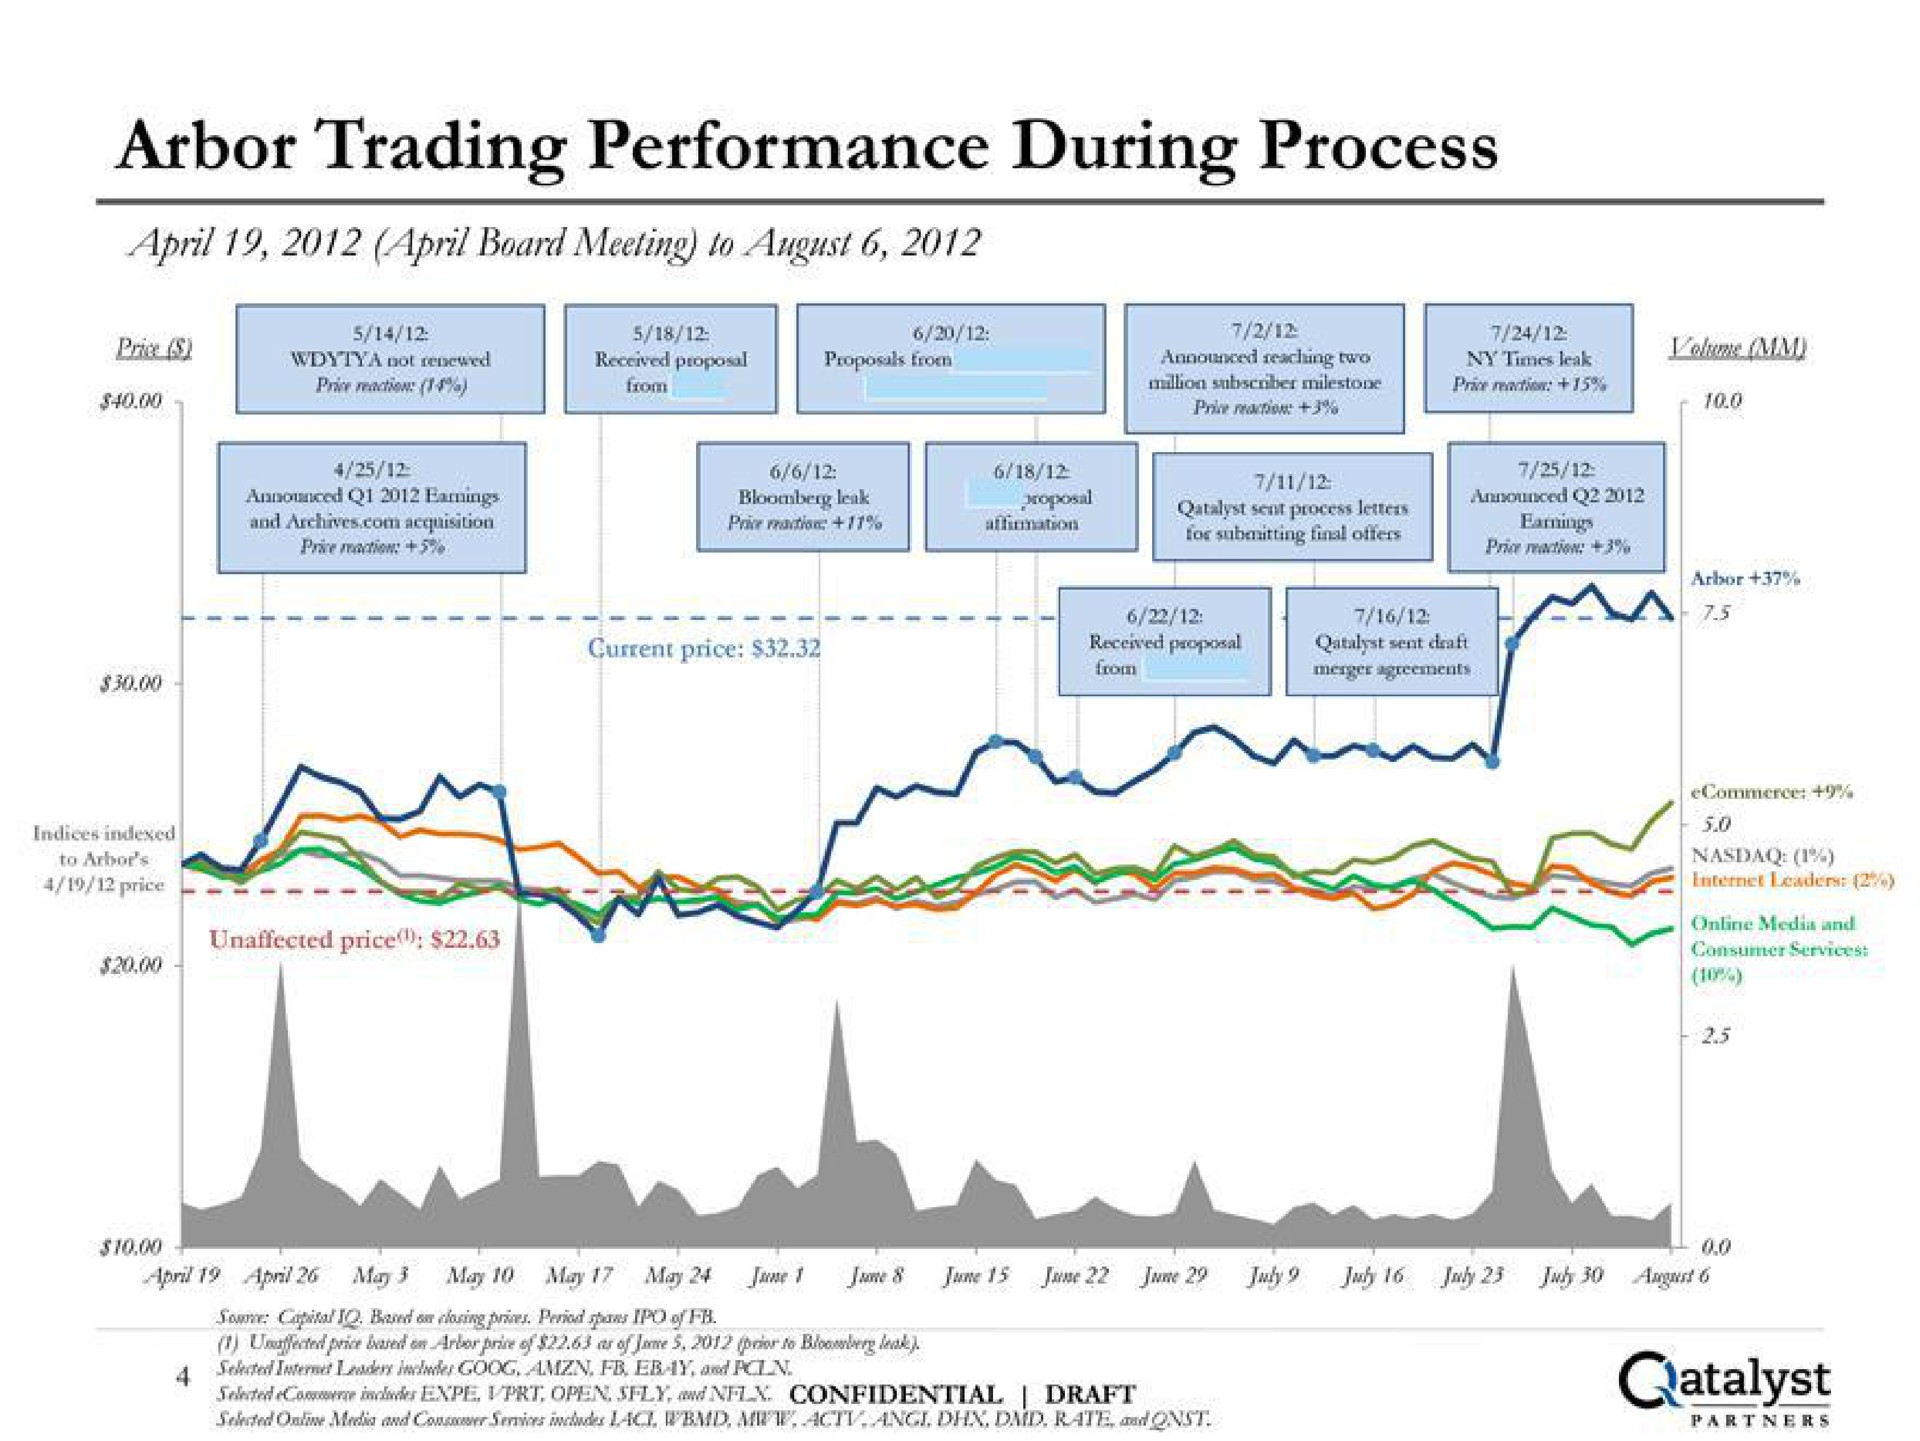 arbor trading performance during process | Qatalyst Partners